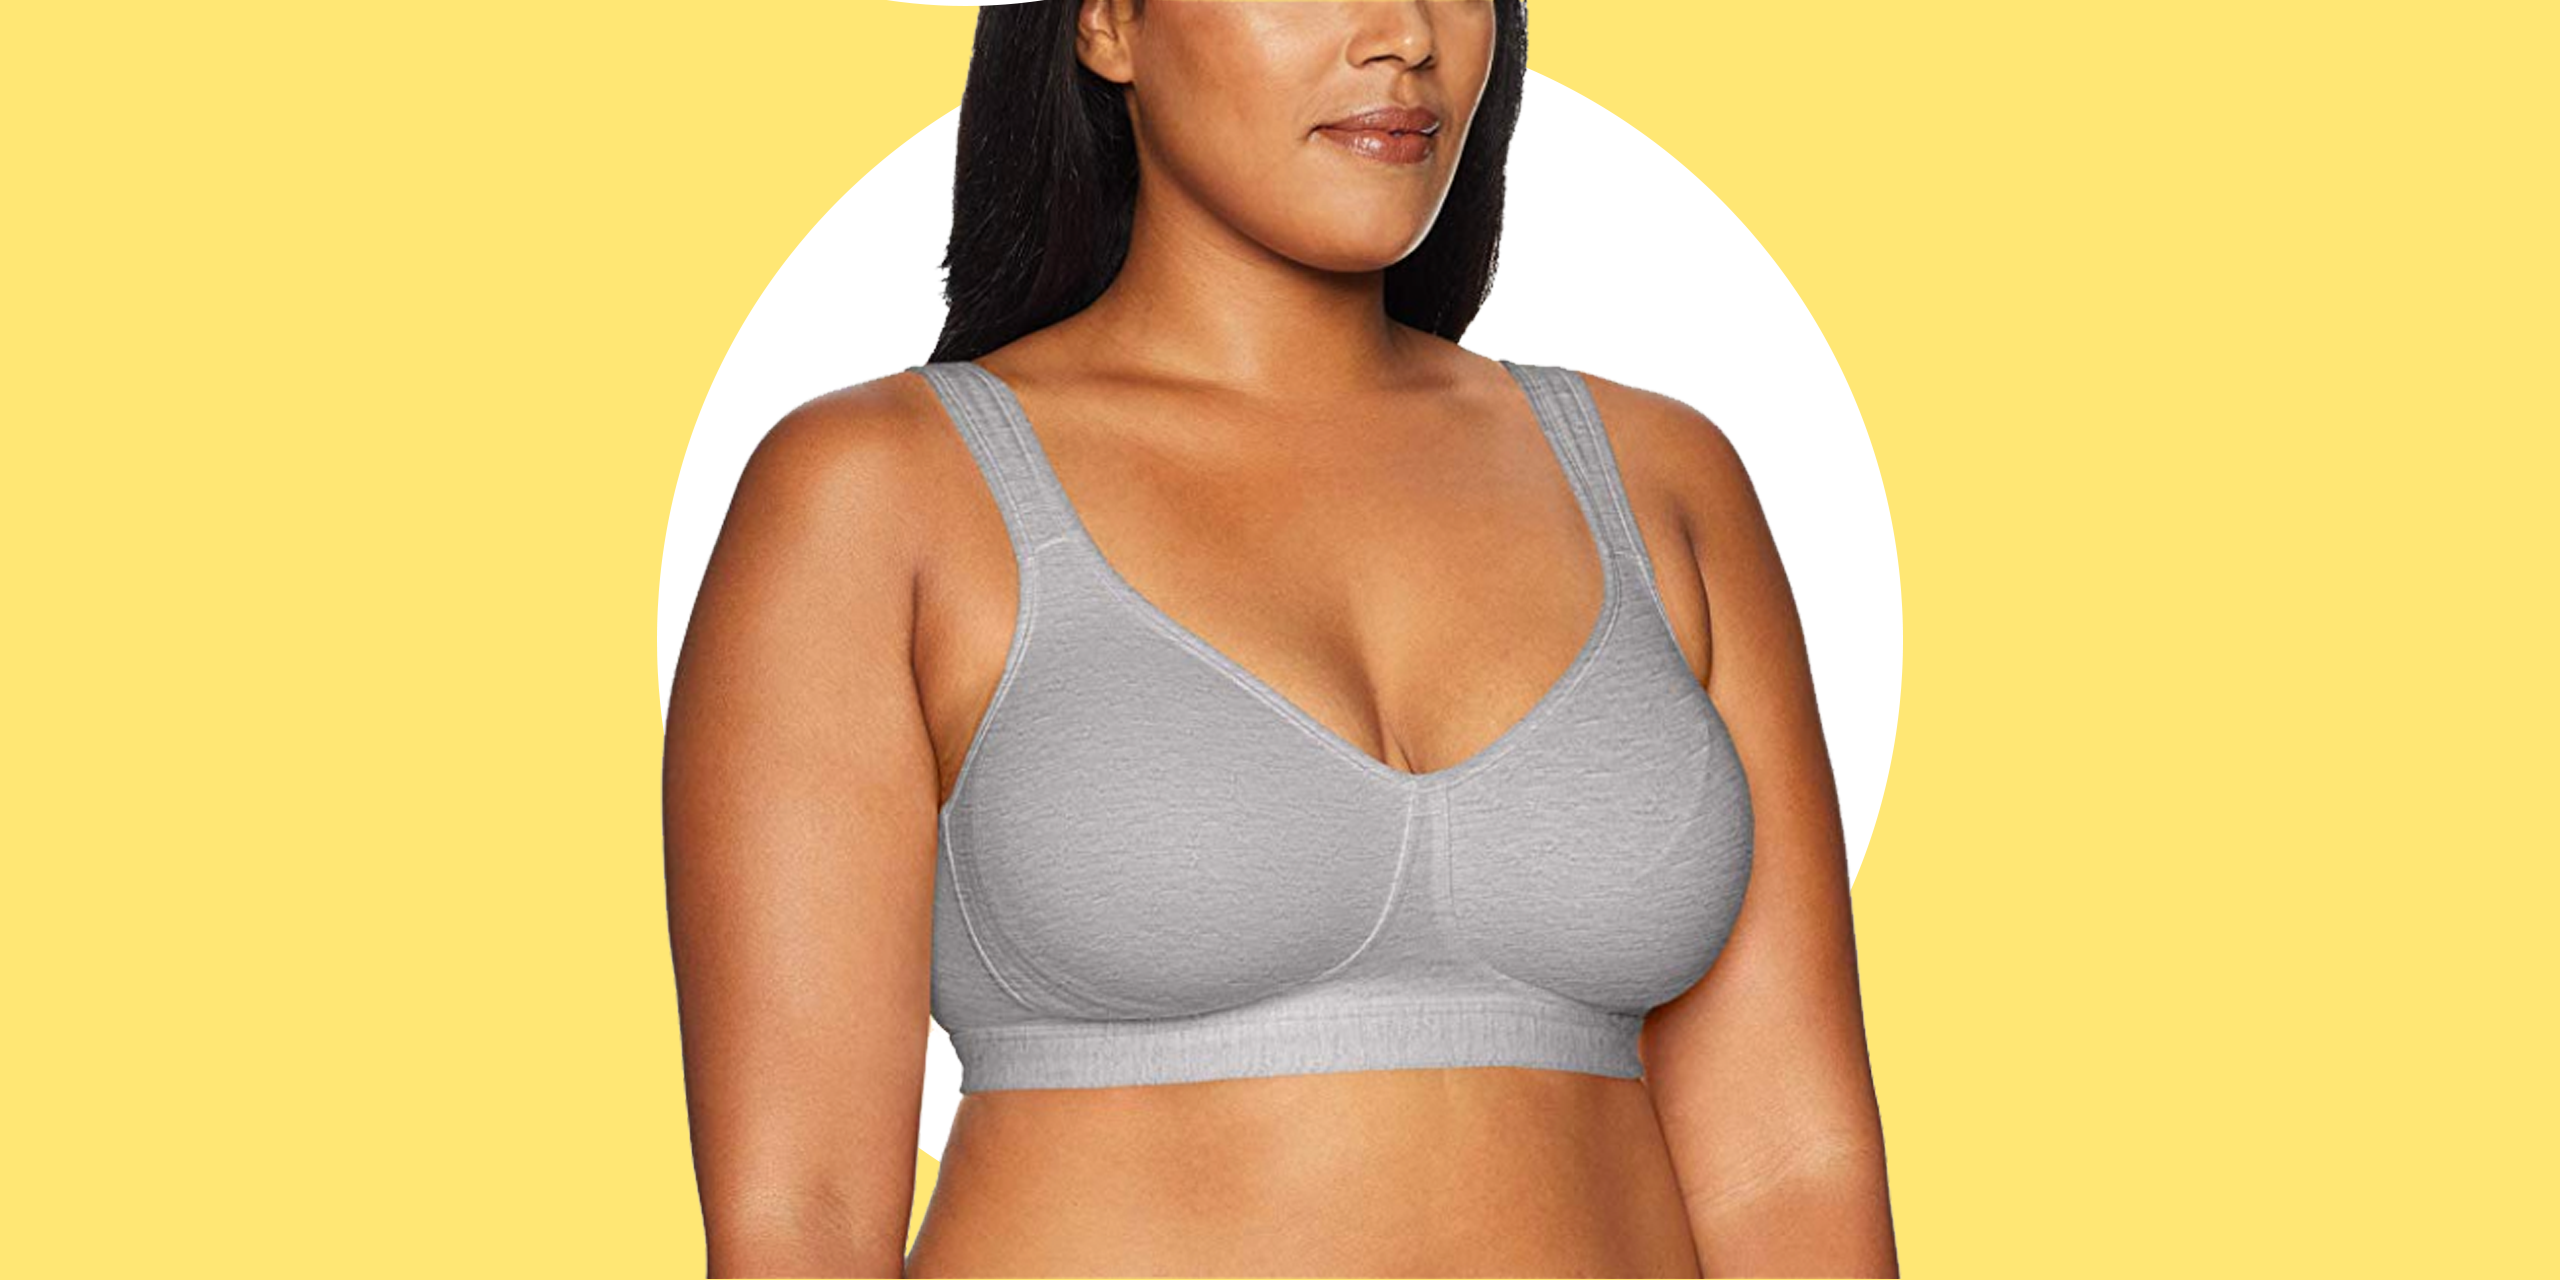 NEW Bra 52C msrp $40 SUPER-WIDE-STRAPS= COMFORT Lined Lace Nude BUY MORE /& SAVE!